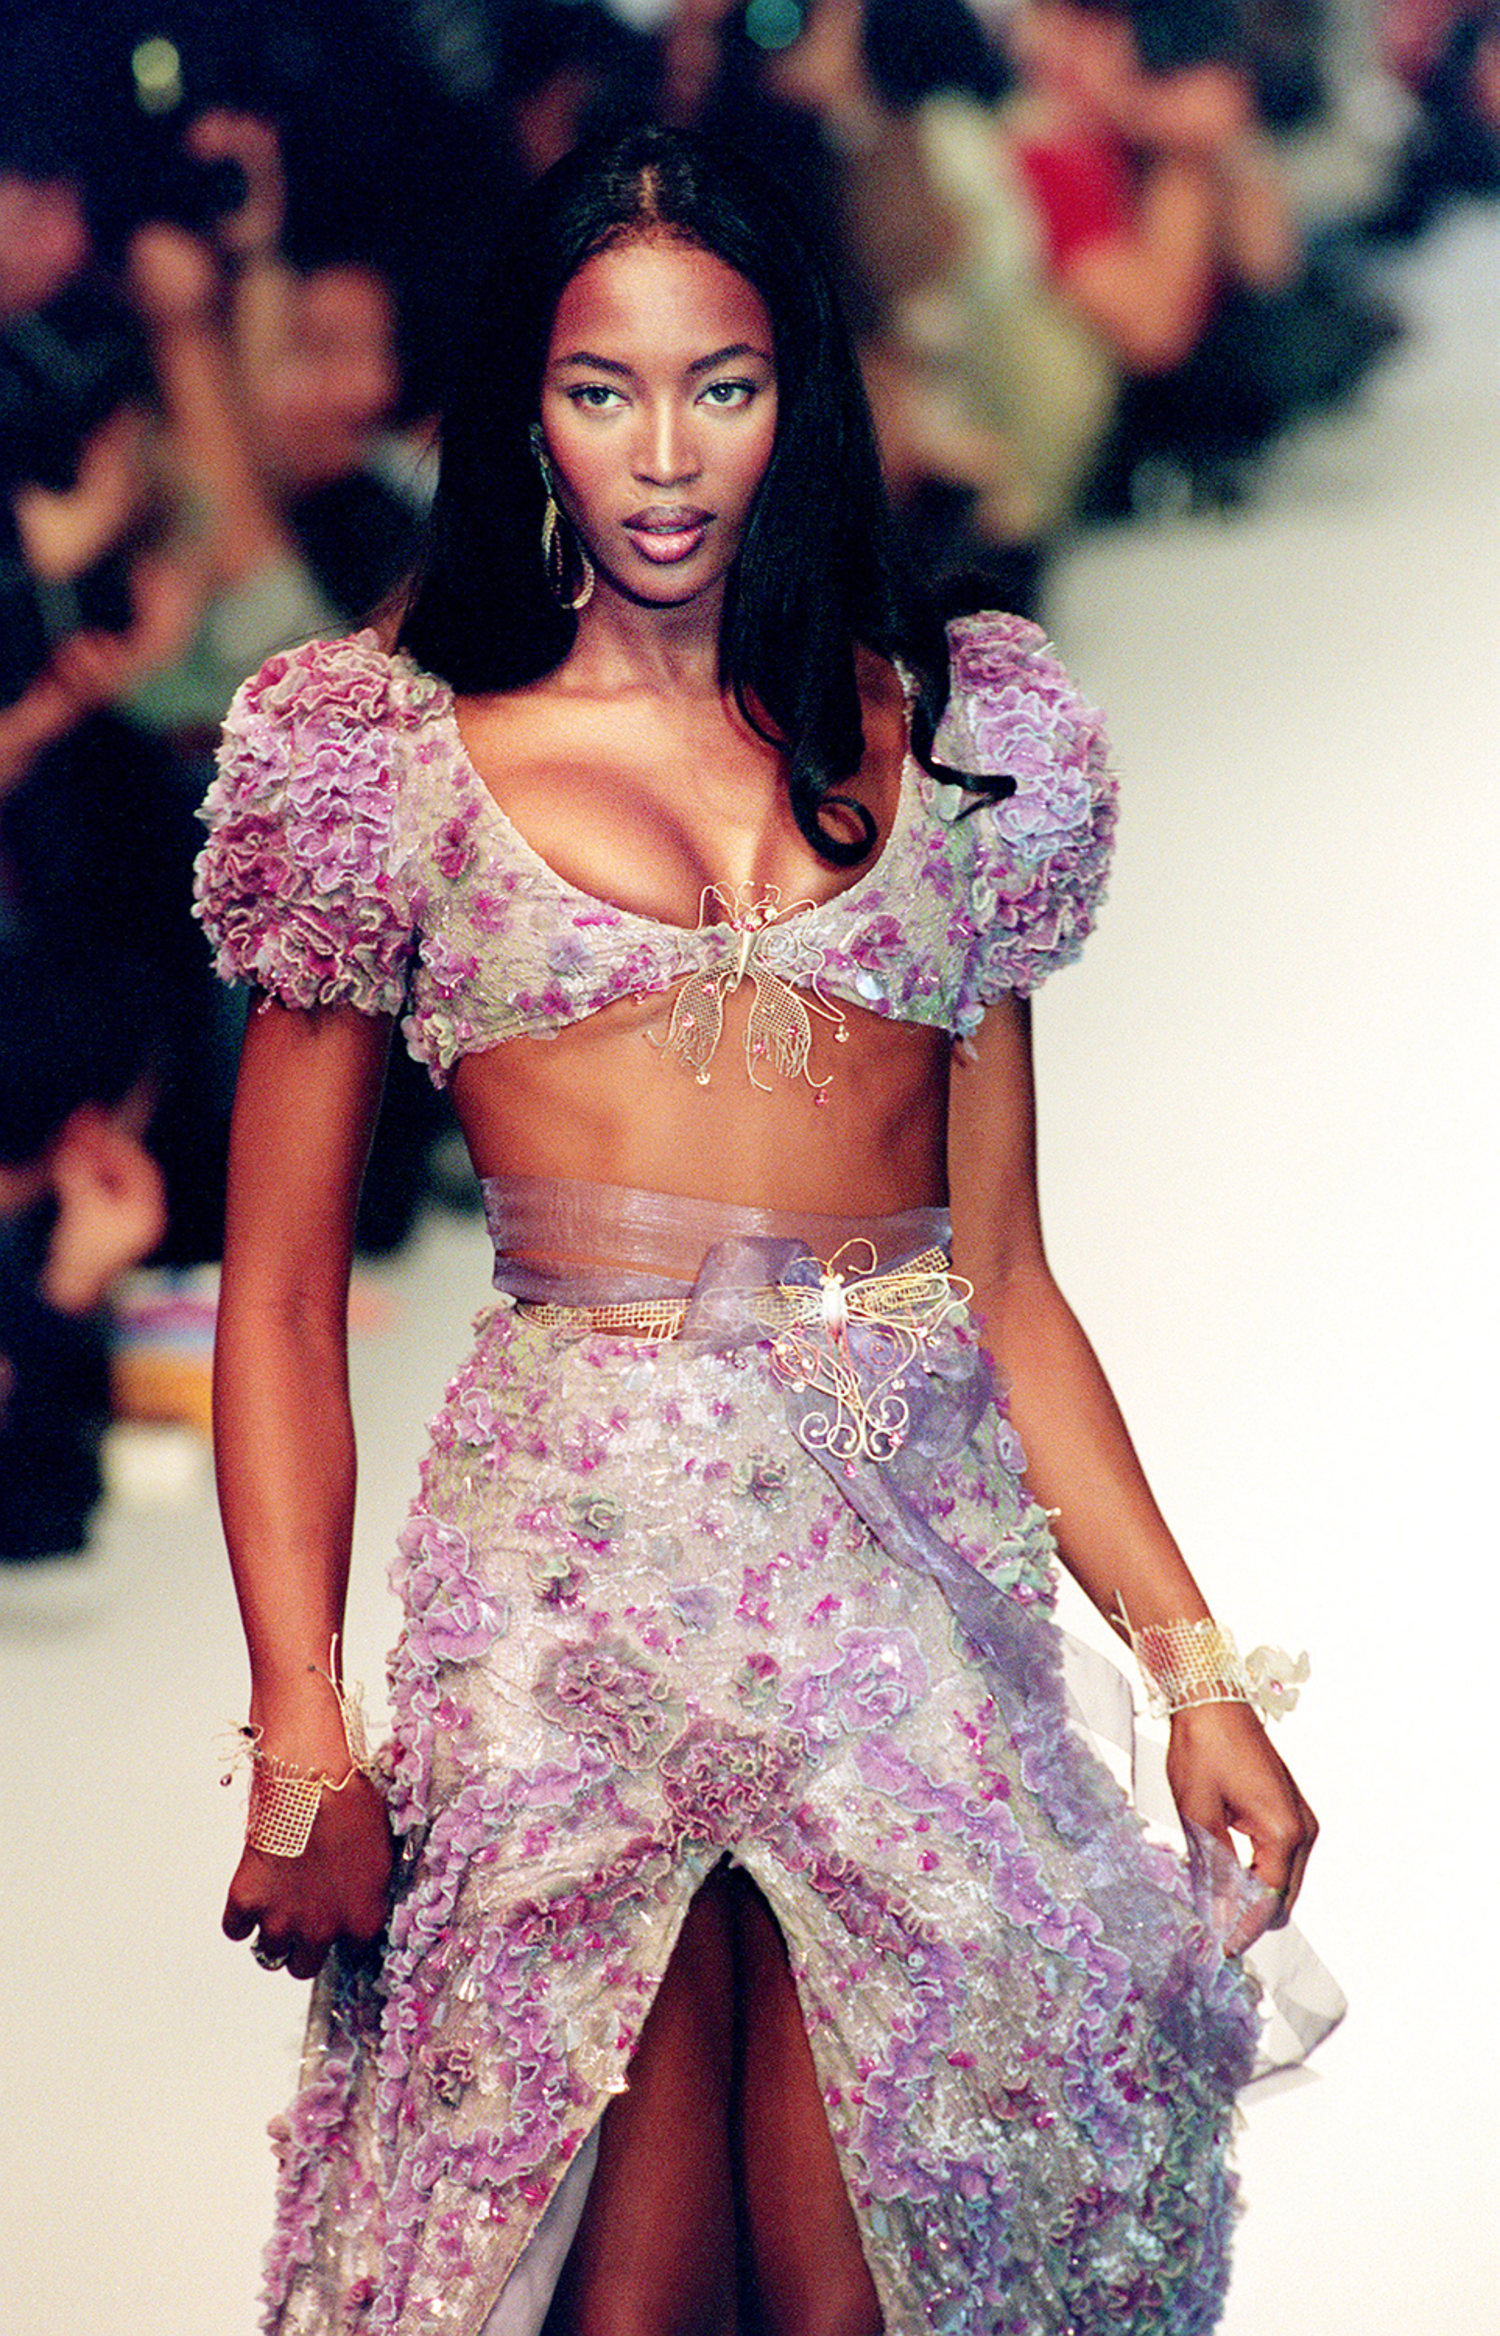 The 25 Top Supermodels of the '90s